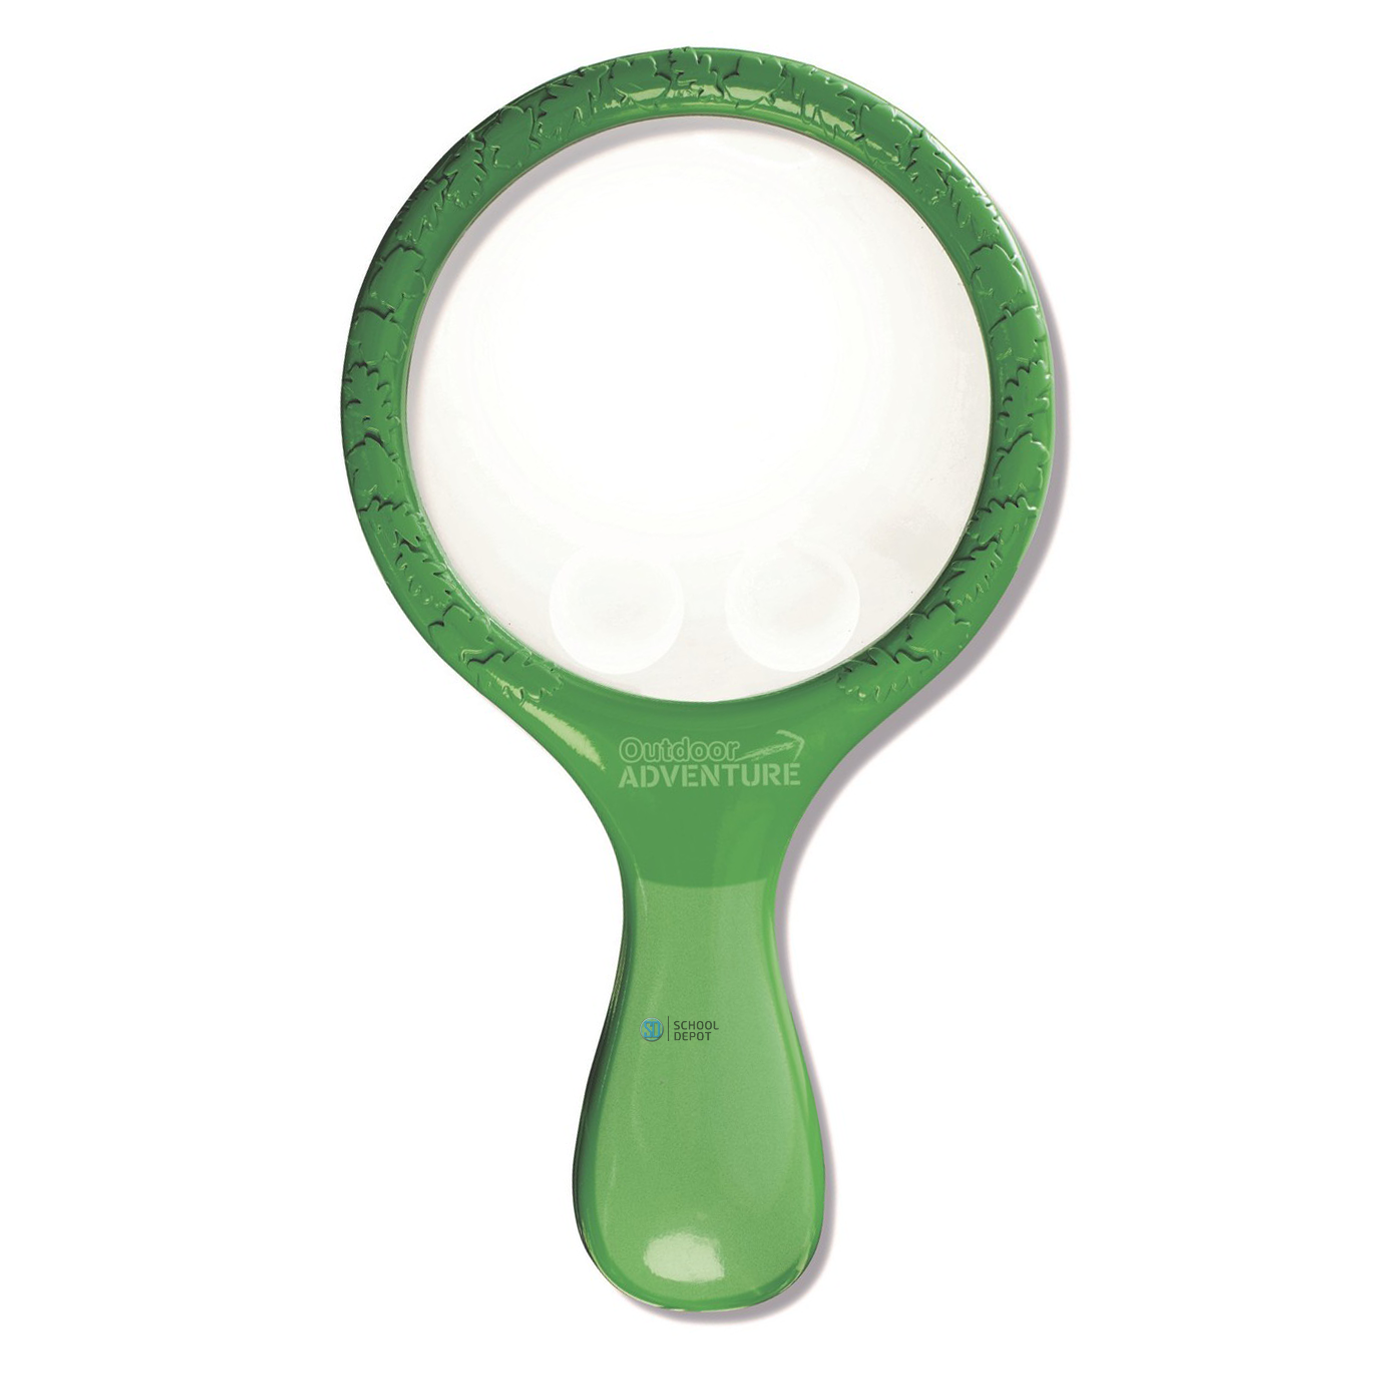 Brainstorm Toys Magnifying Glass for Kids Outdoor Adventure Magnifier